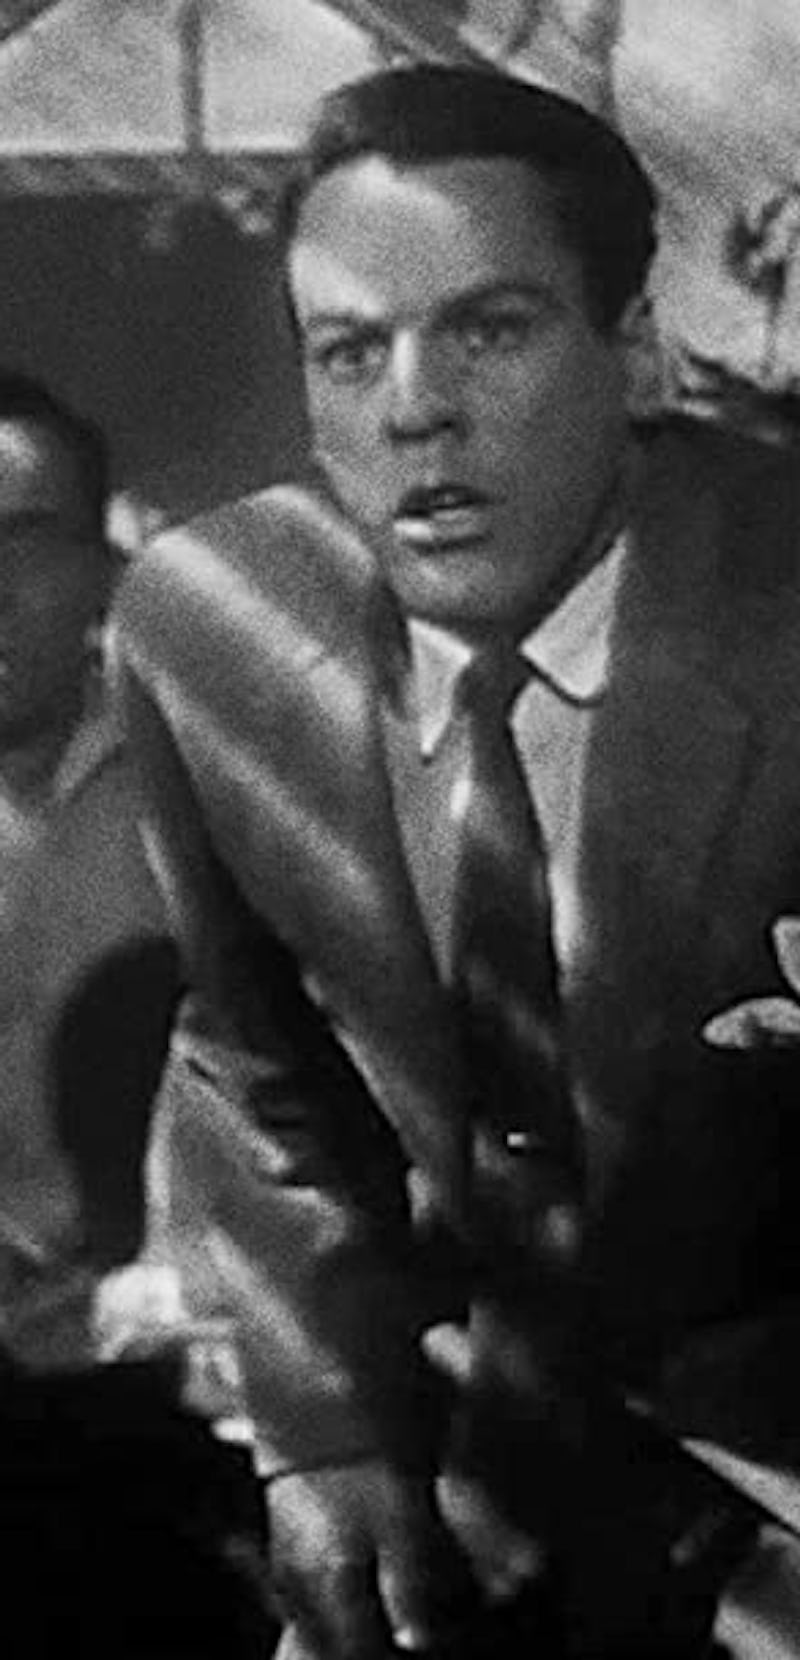 kevin mccarthy in greenhouse looking scared from invasion of the body snatchers